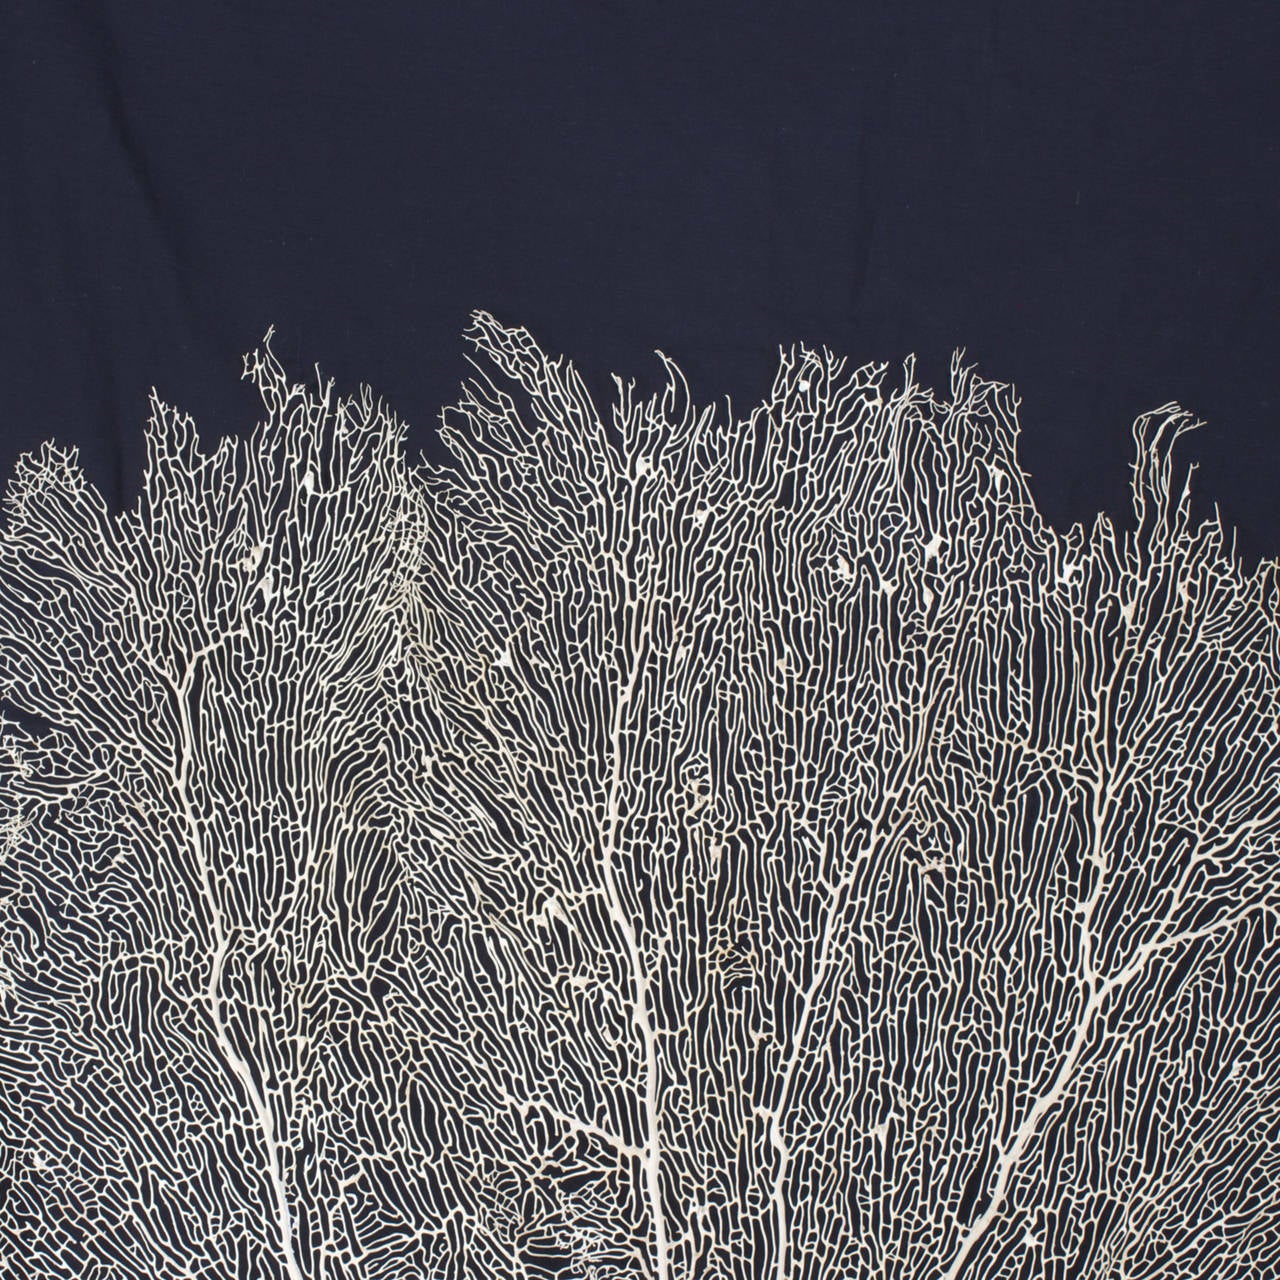 Large cream or white sea fan with a complicated arterial structure and bold form. One of mother natures great works of art. We have other similar sea fans available, if you would like a pair.
Sea fans look great on wall brackets or shelves or